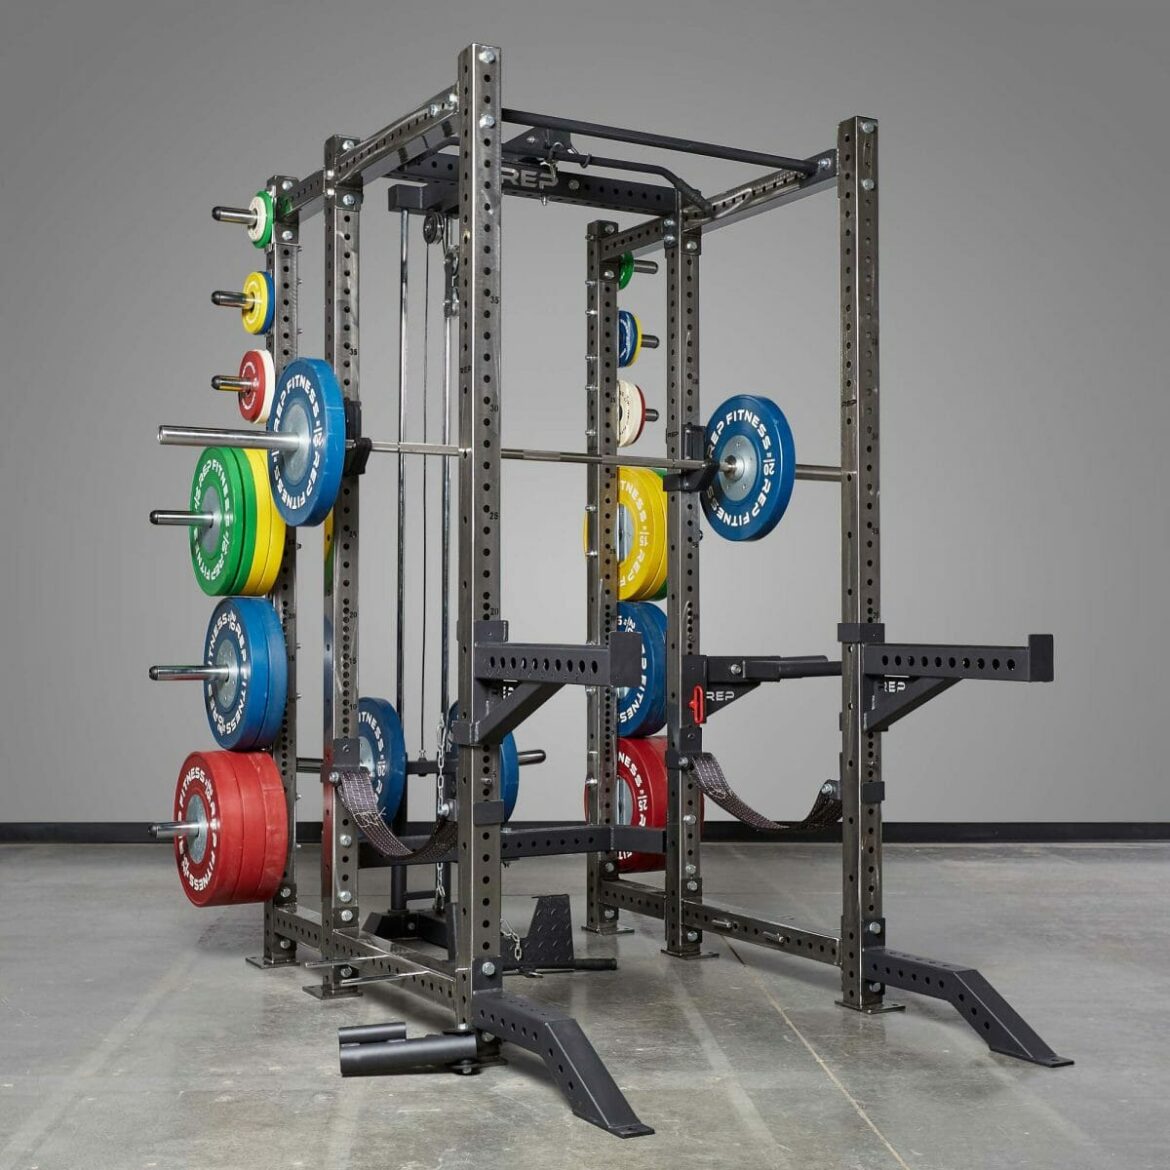 Using Free Weights at Home – The Benefits of a High-Quality Power Rack